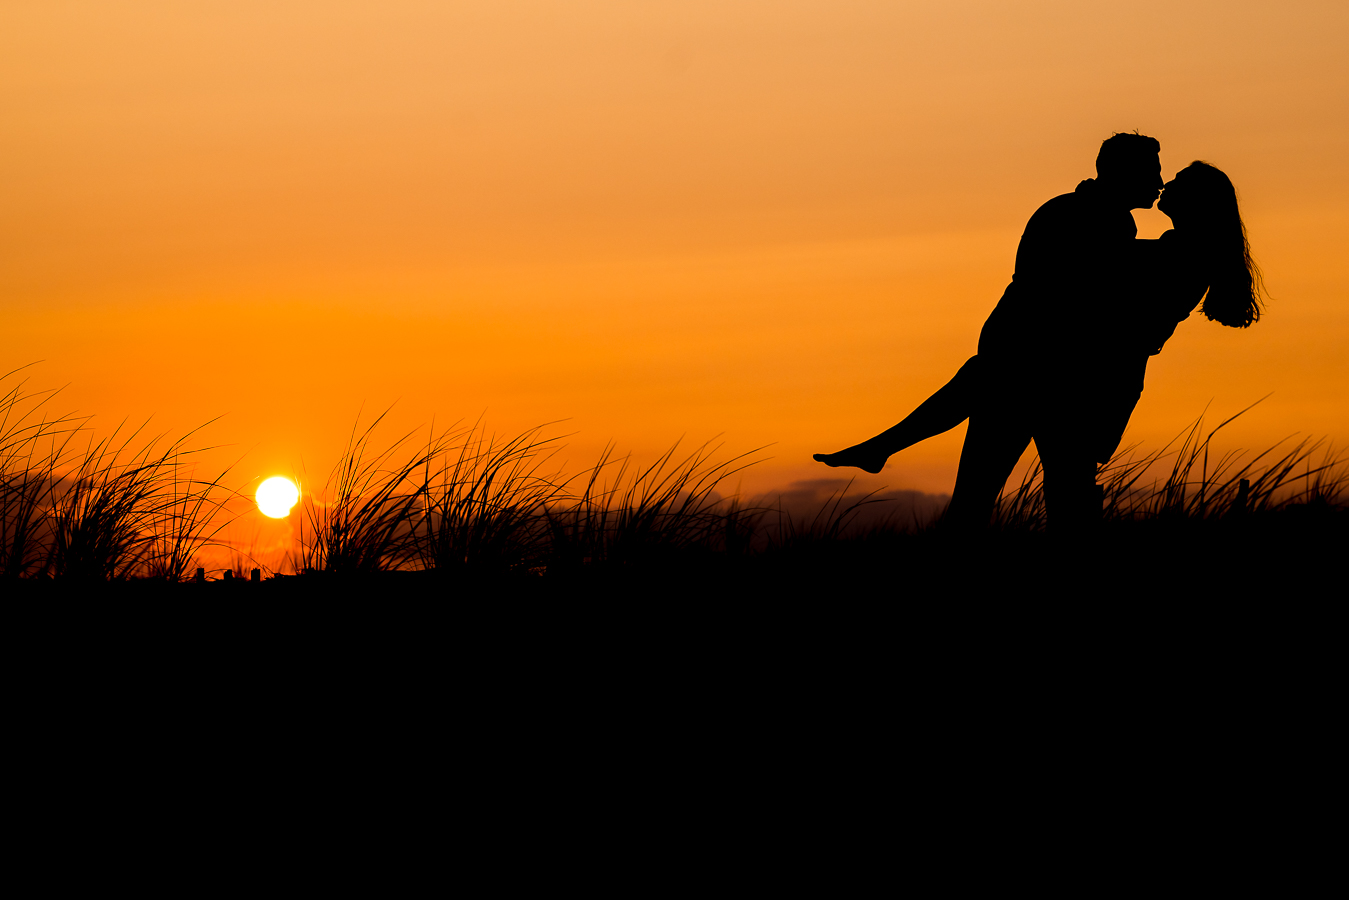 NJ Shore Engagement photographer, lisa rhinehart, captures this silhouetted image of the couple kissing each other as the vibrant orange sun is setting behind them 